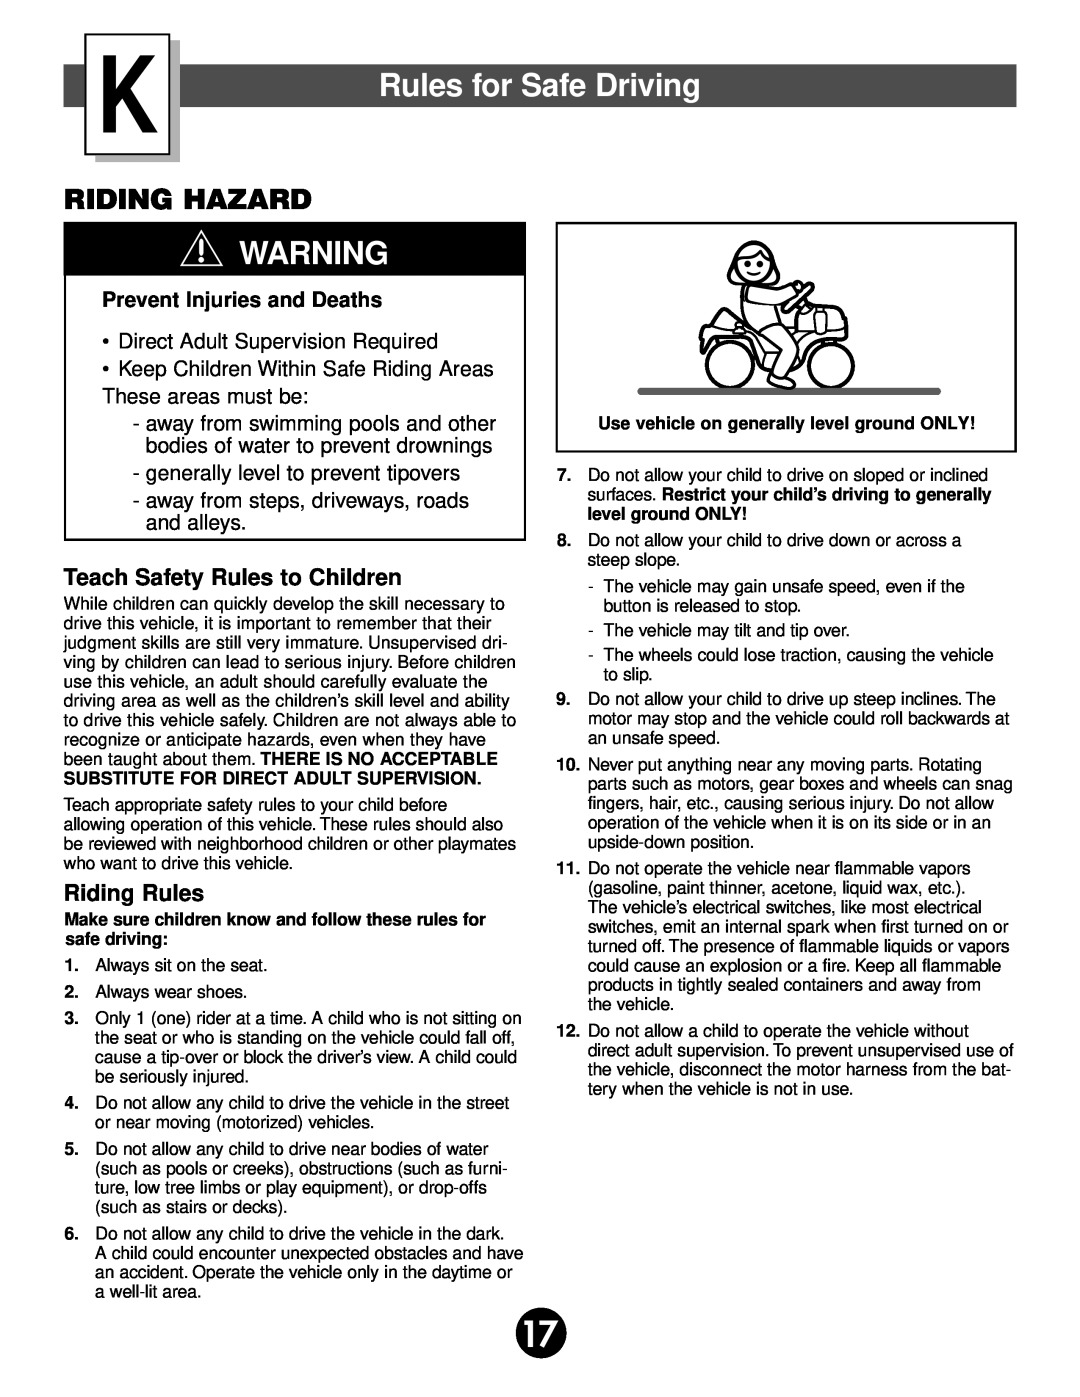 Fisher-Price 75320 Rules for Safe Driving, Keep Children Within Safe Riding Areas These areas must be, Riding Hazard 